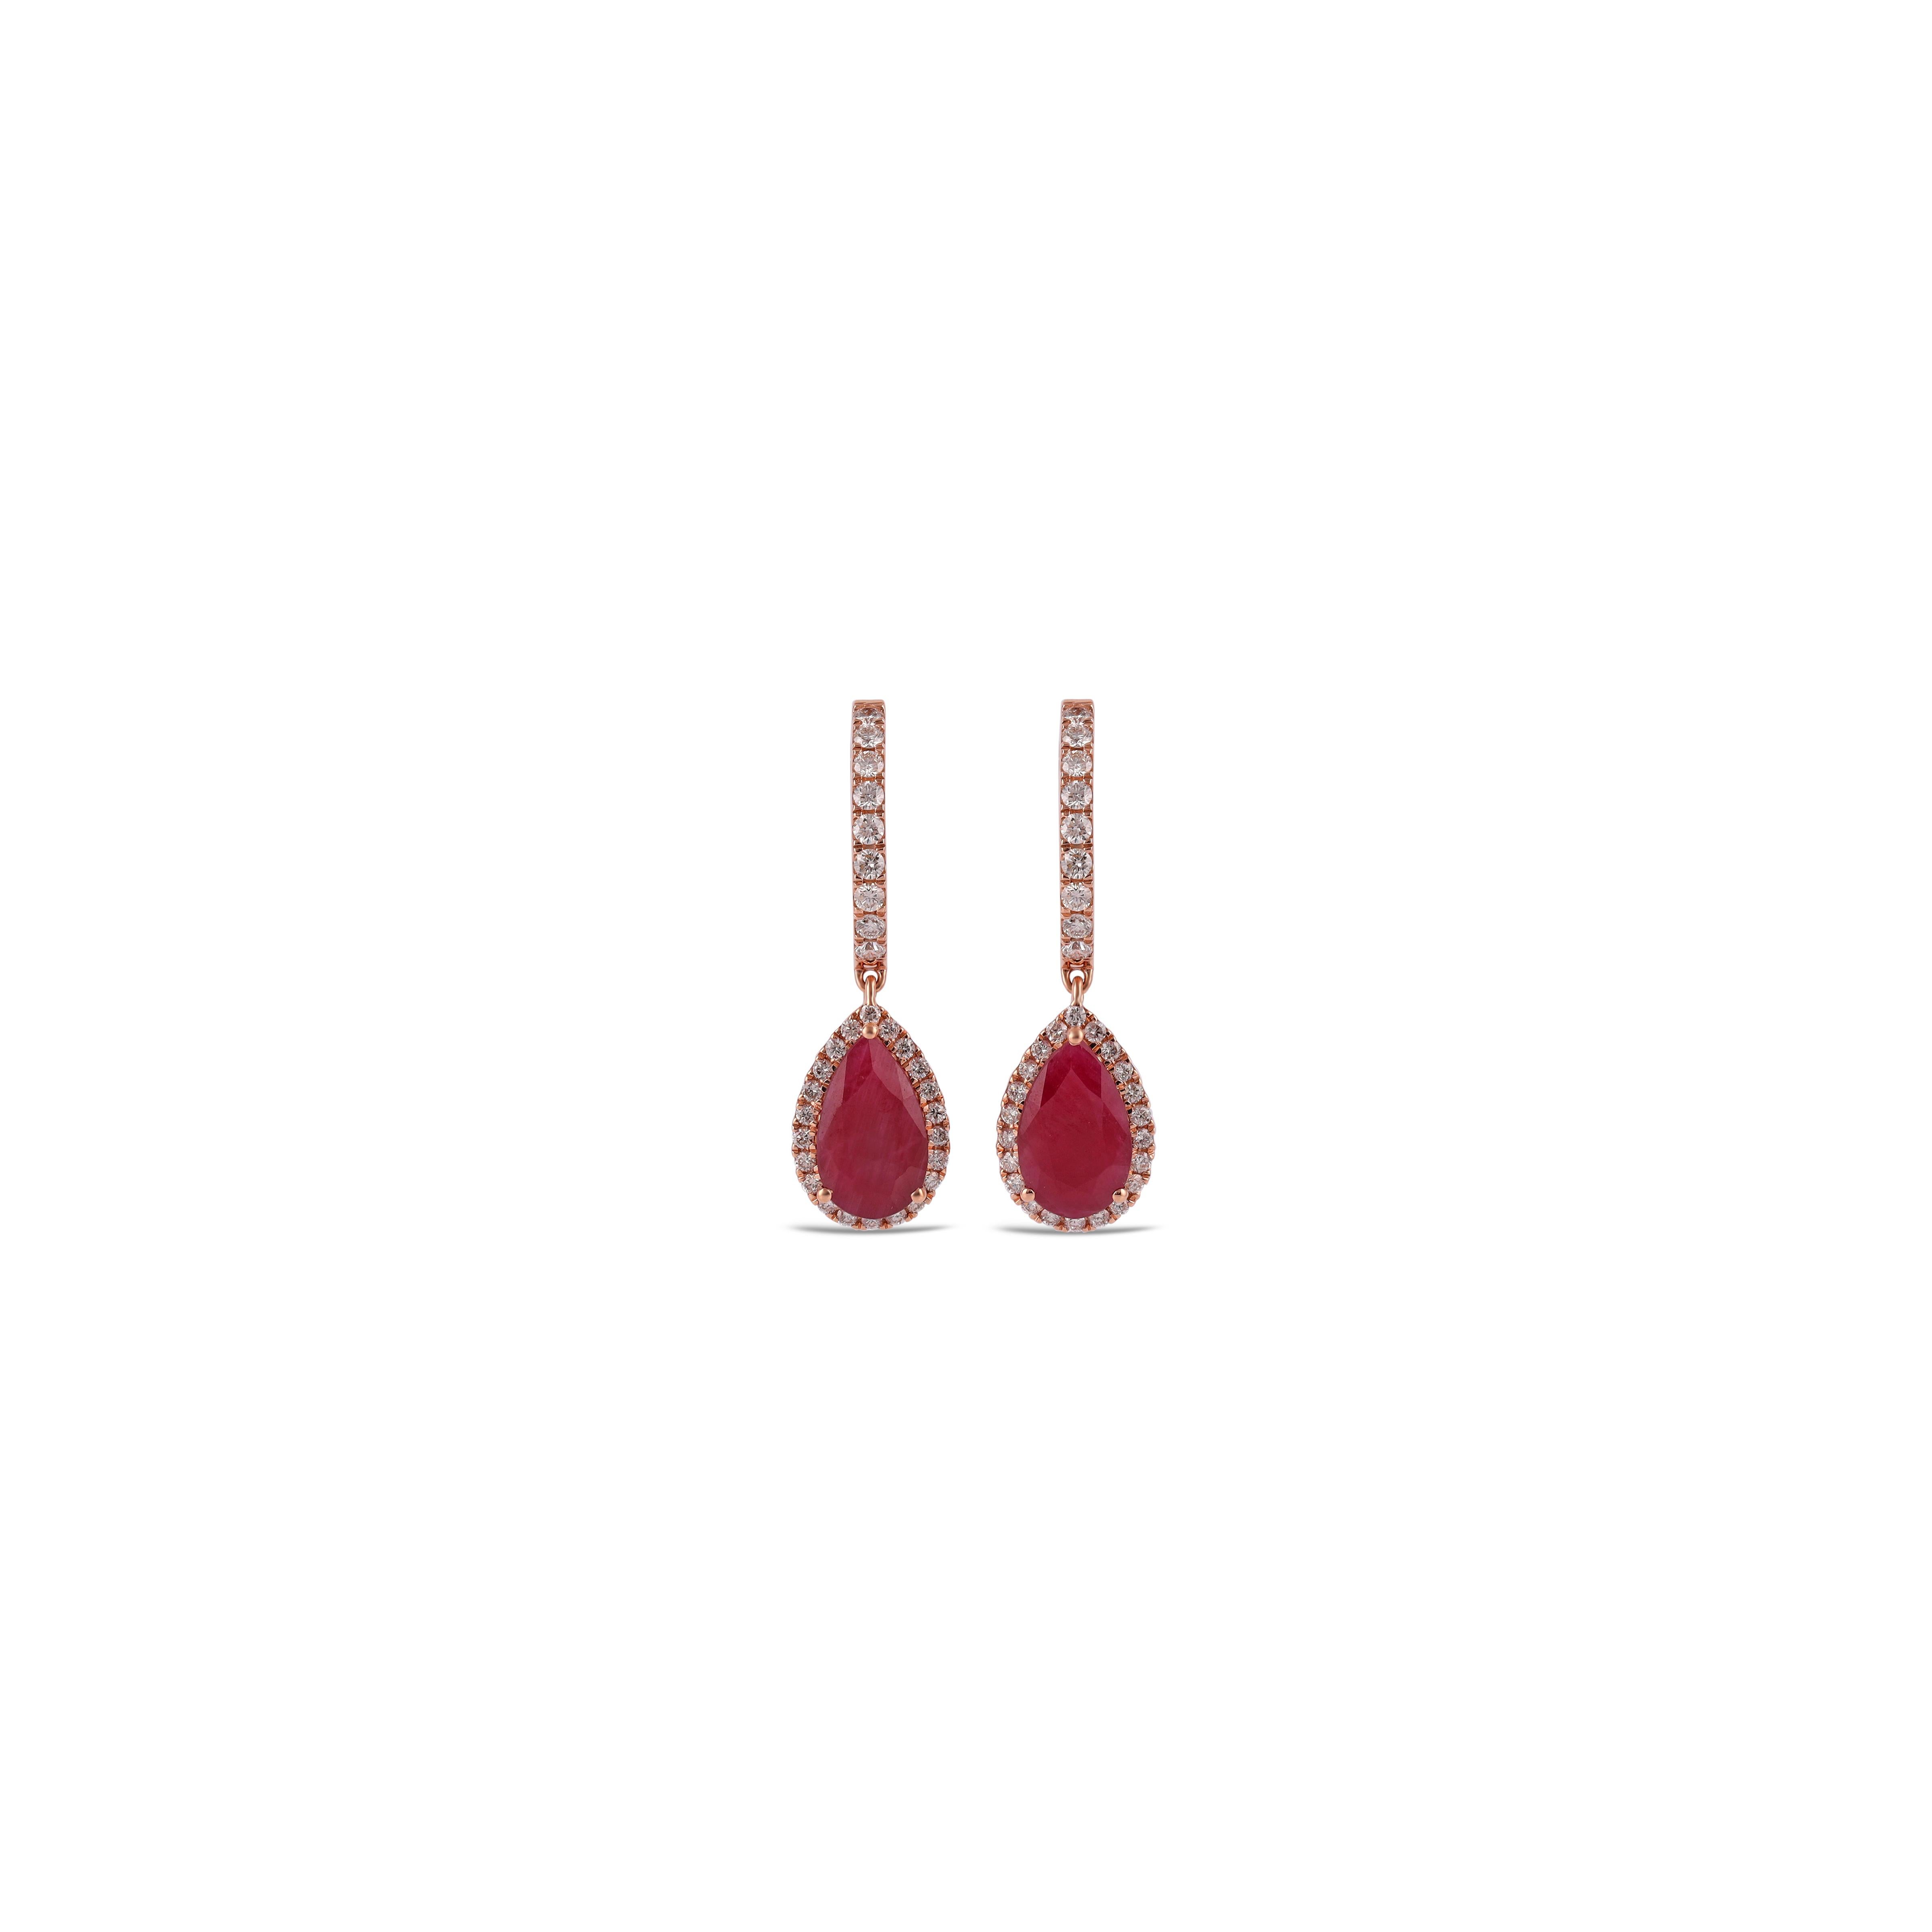 If you are looking for Ruby earrings, this is the ultimate find, (3.94 carats) of the finest Ruby color is the focal point. Perfectly matched in color, size, luster, and transparency. The color is what you want - intense Pigeon blued . The diamonds 